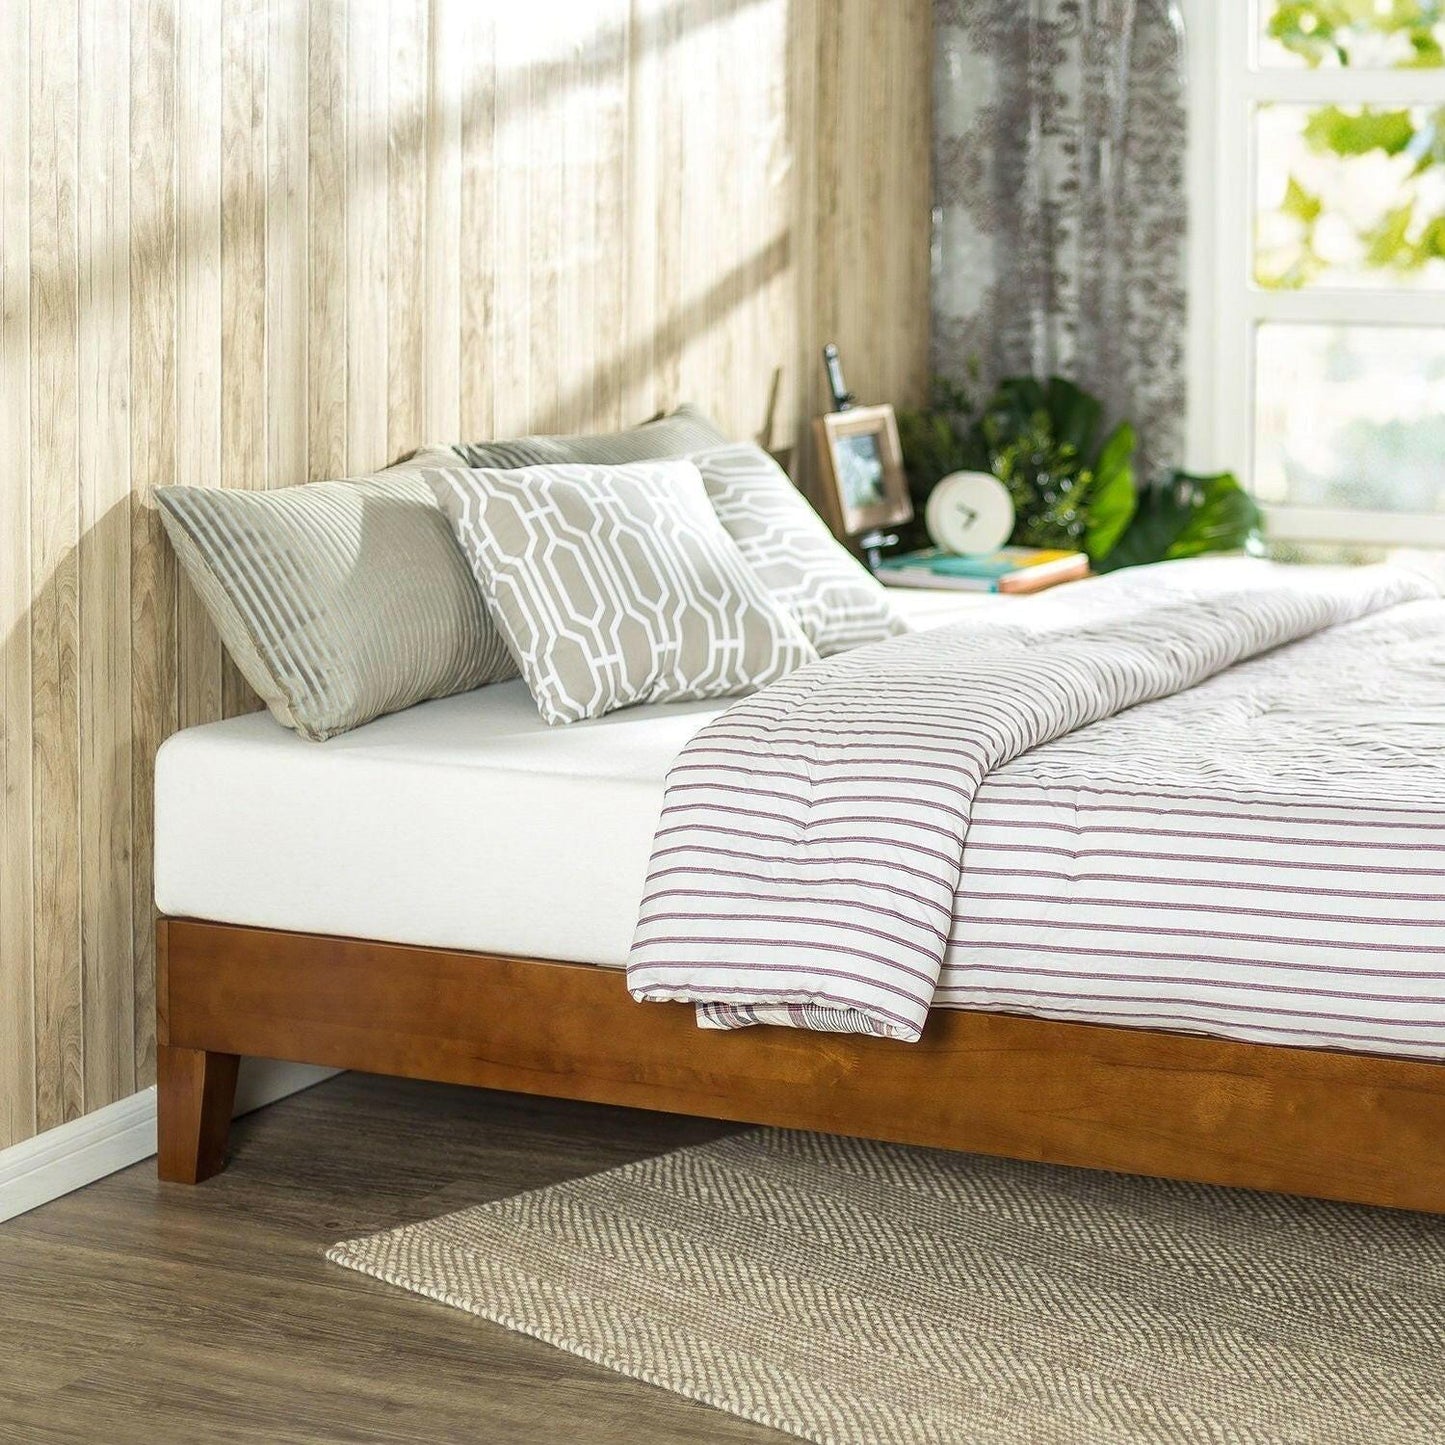 Queen size Solid Wood Low Profile Platform Bed Frame in Cherry Finish - FurniFindUSA